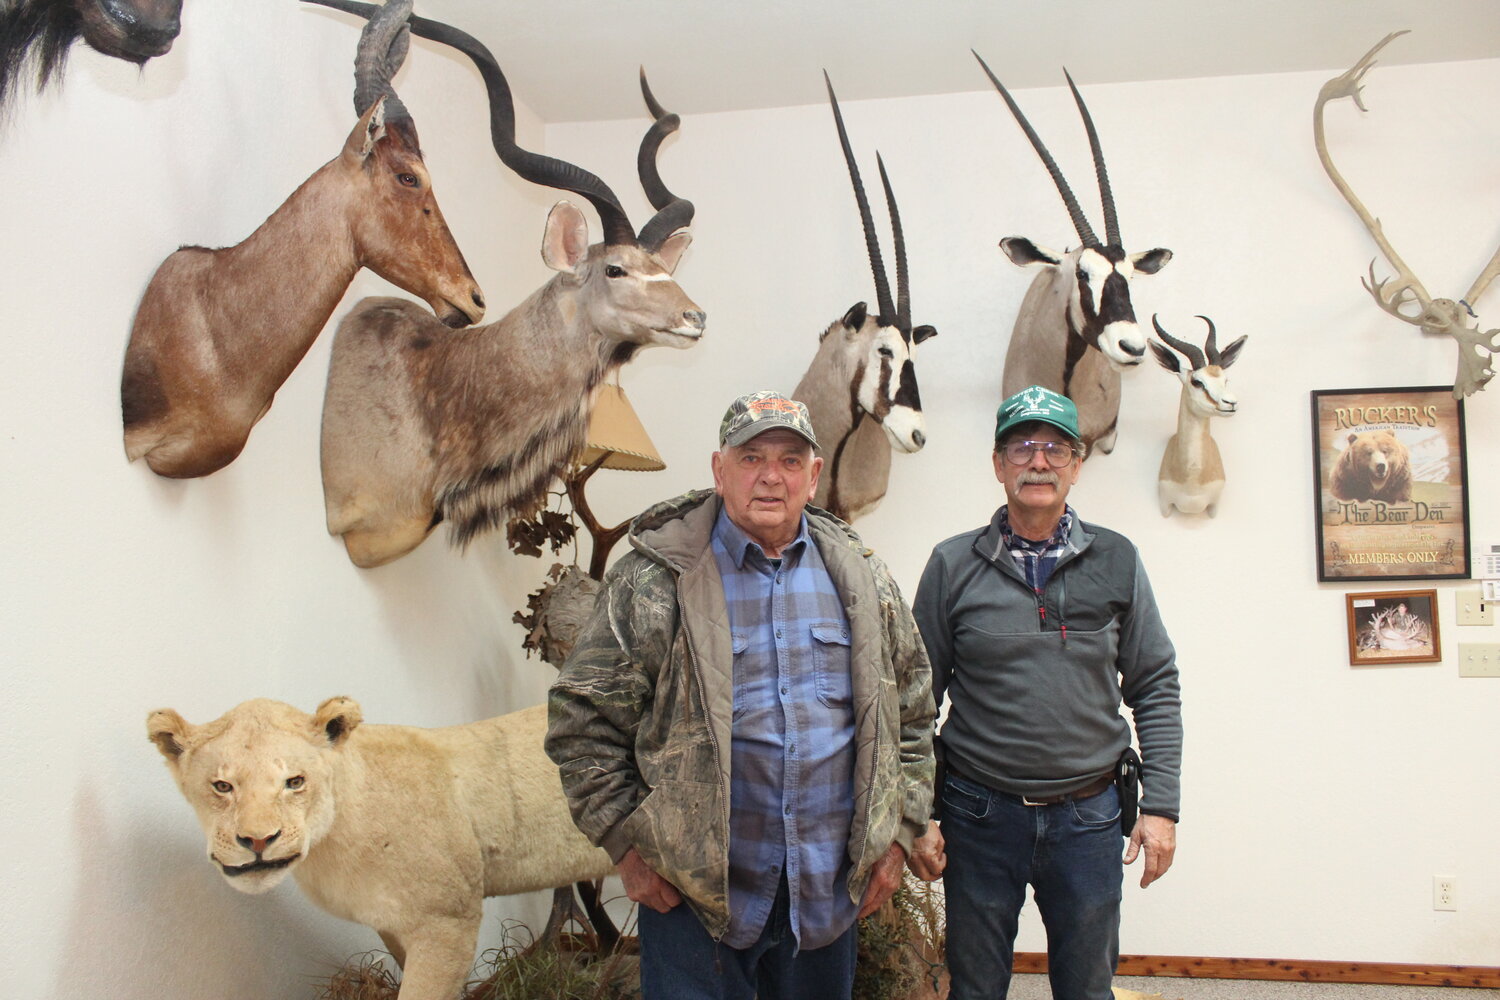 RELIVING THEIR ADVENTURES through a magnificent trophy room, Mark Rucker and his father Laverne enjoy a purpose built building to display big game taken in Africa with a reserve bow and arrow.